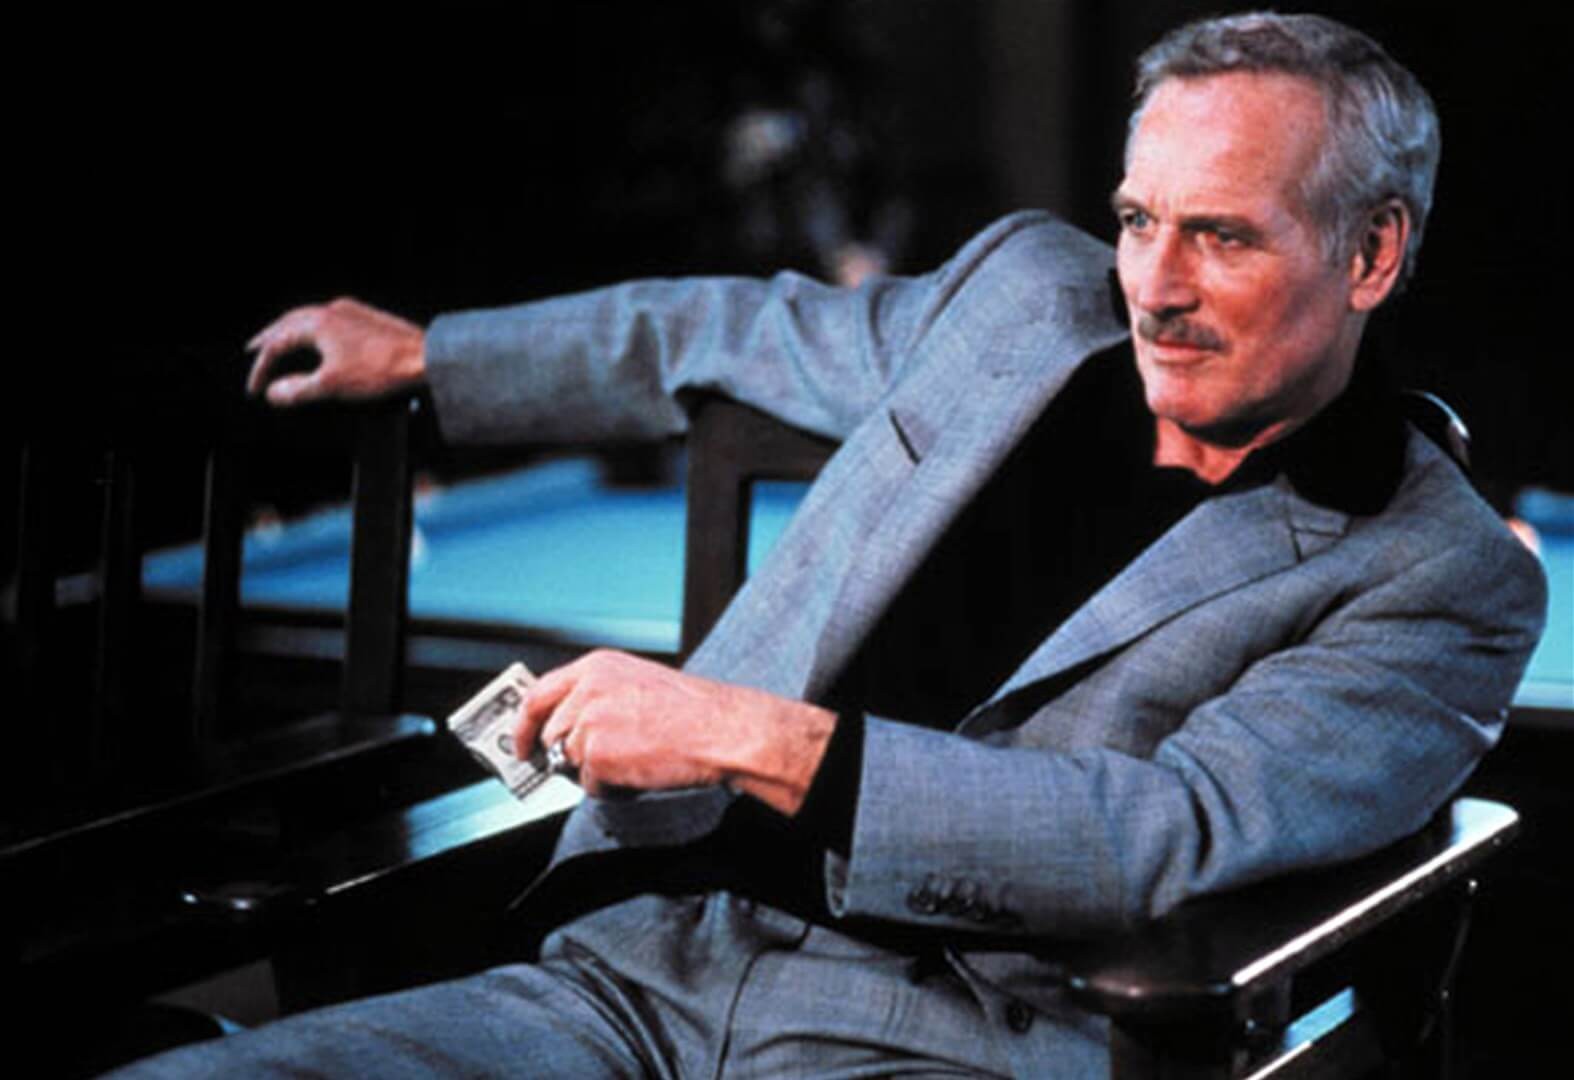 Paul Newman reprised his role as from The Hustler (1961)